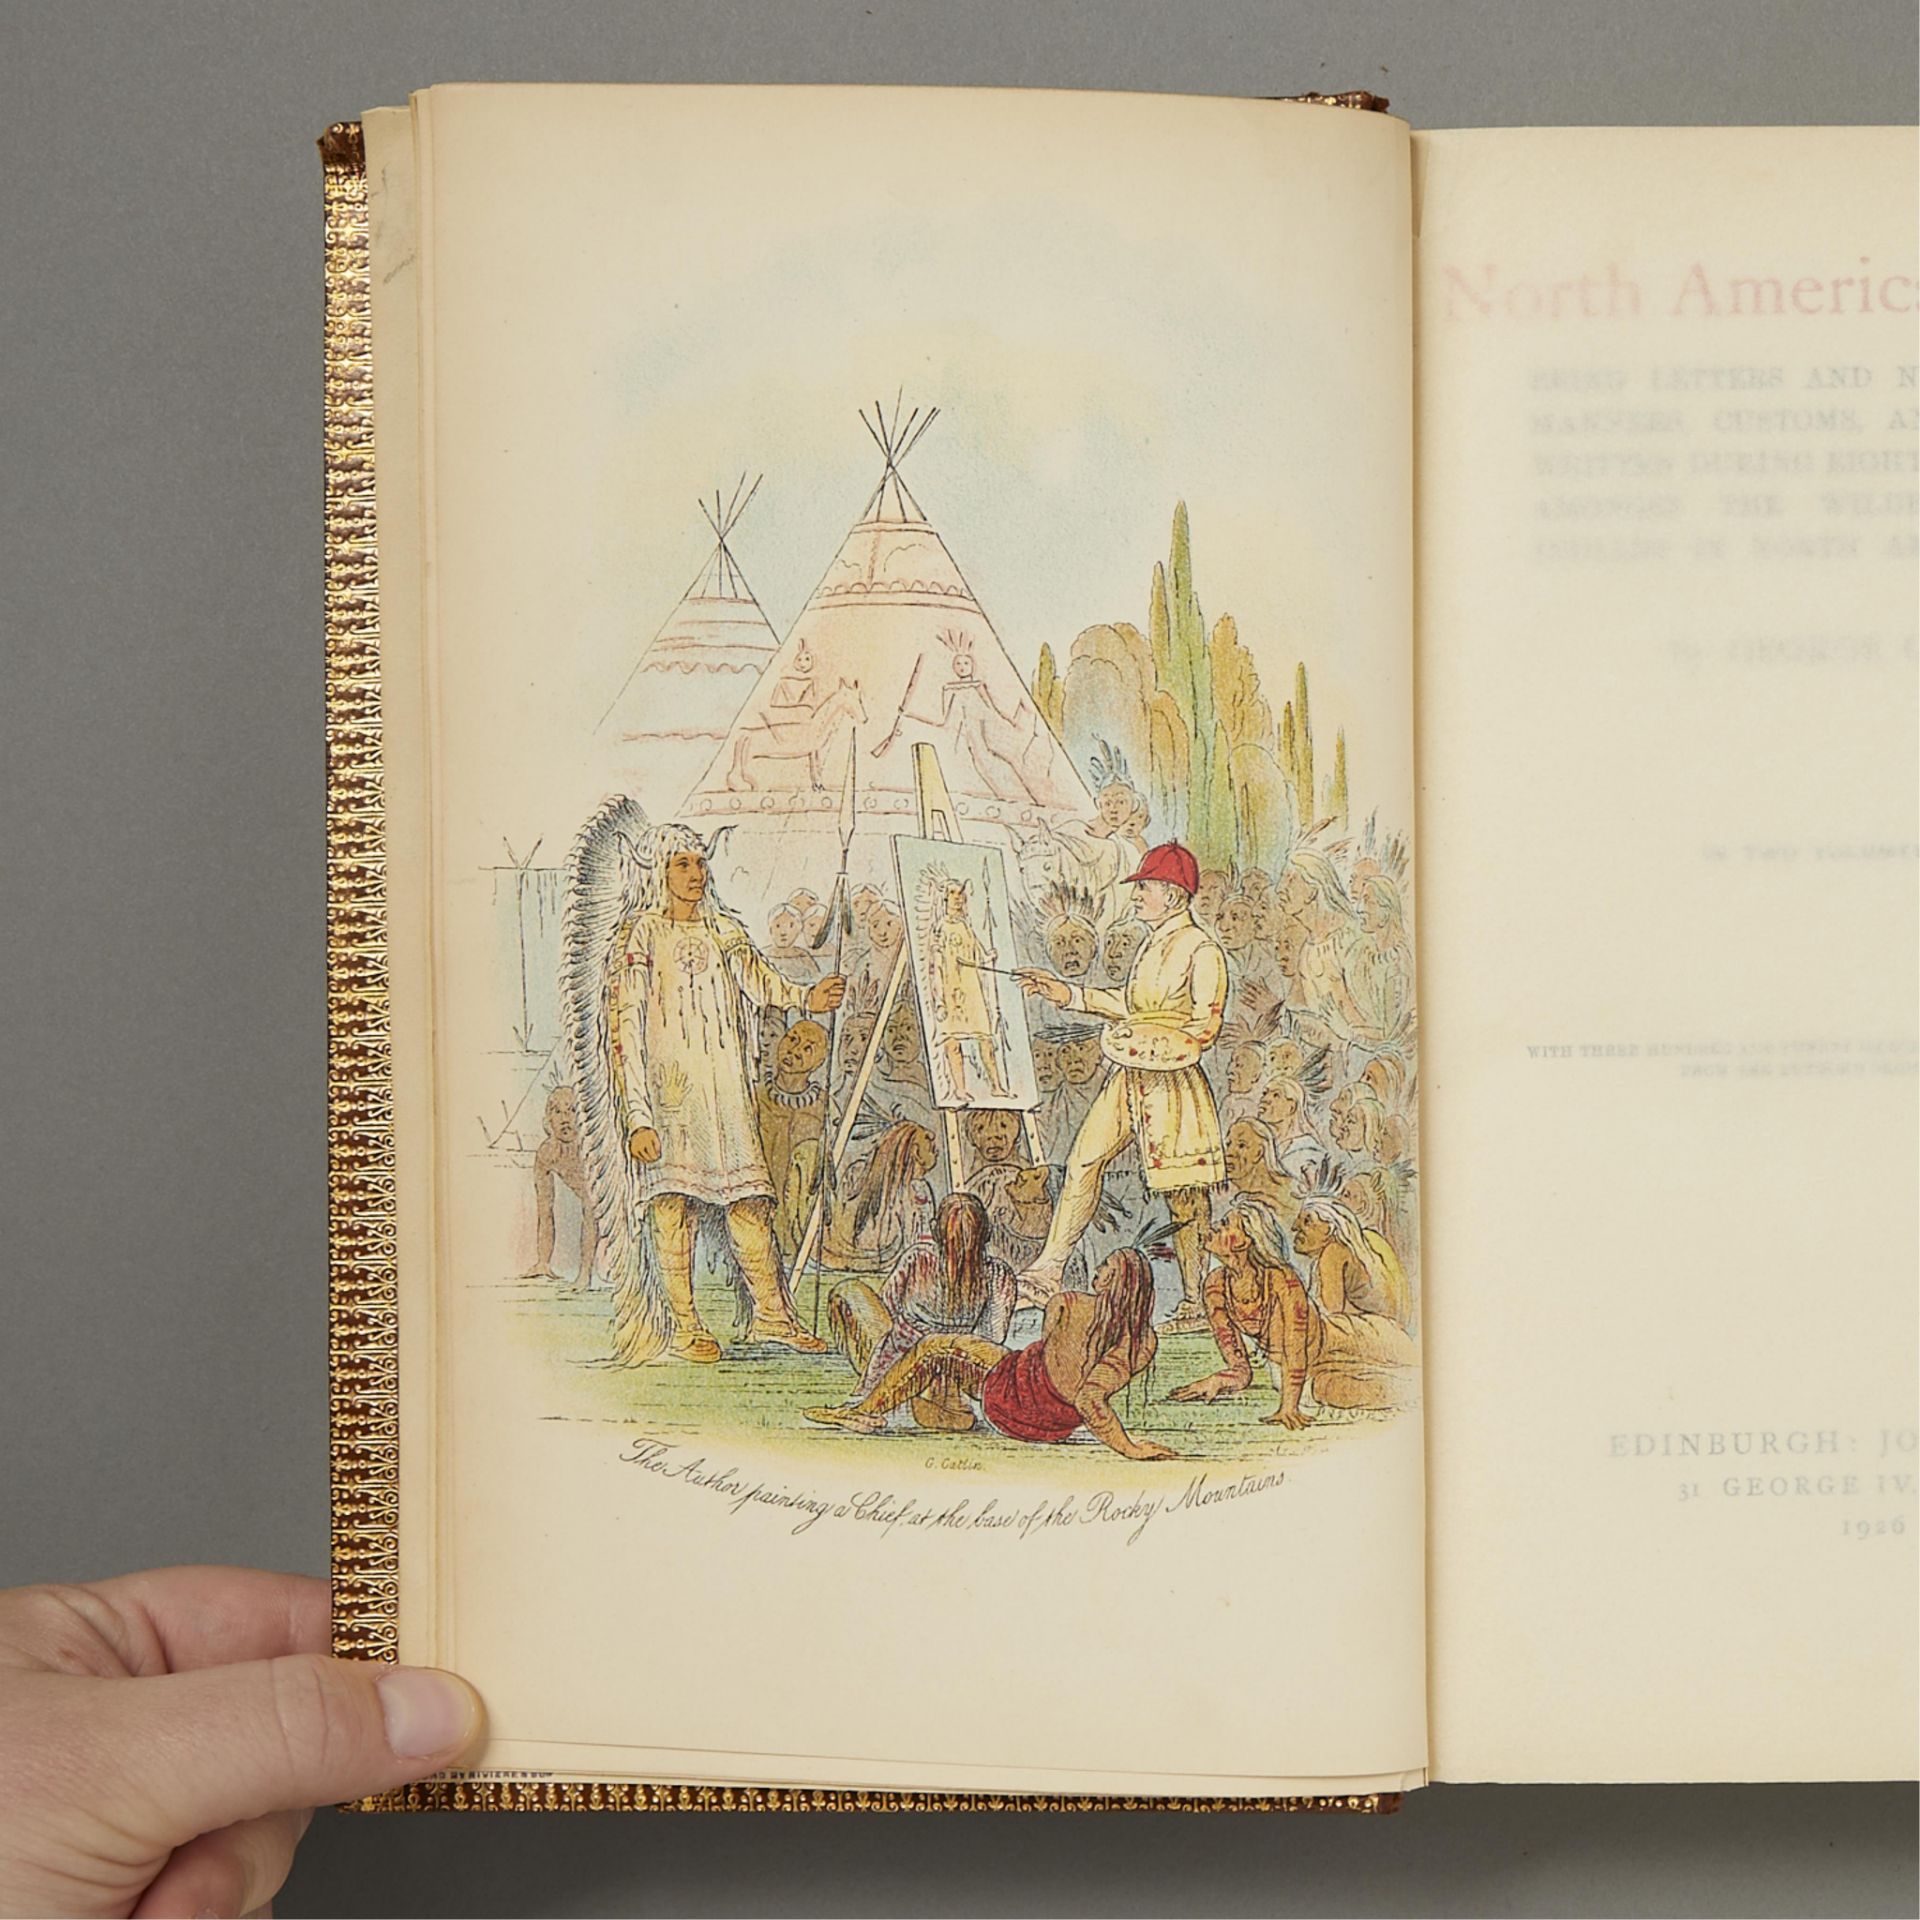 C.M. Russell Painting in "North American Indians" - Bild 6 aus 24